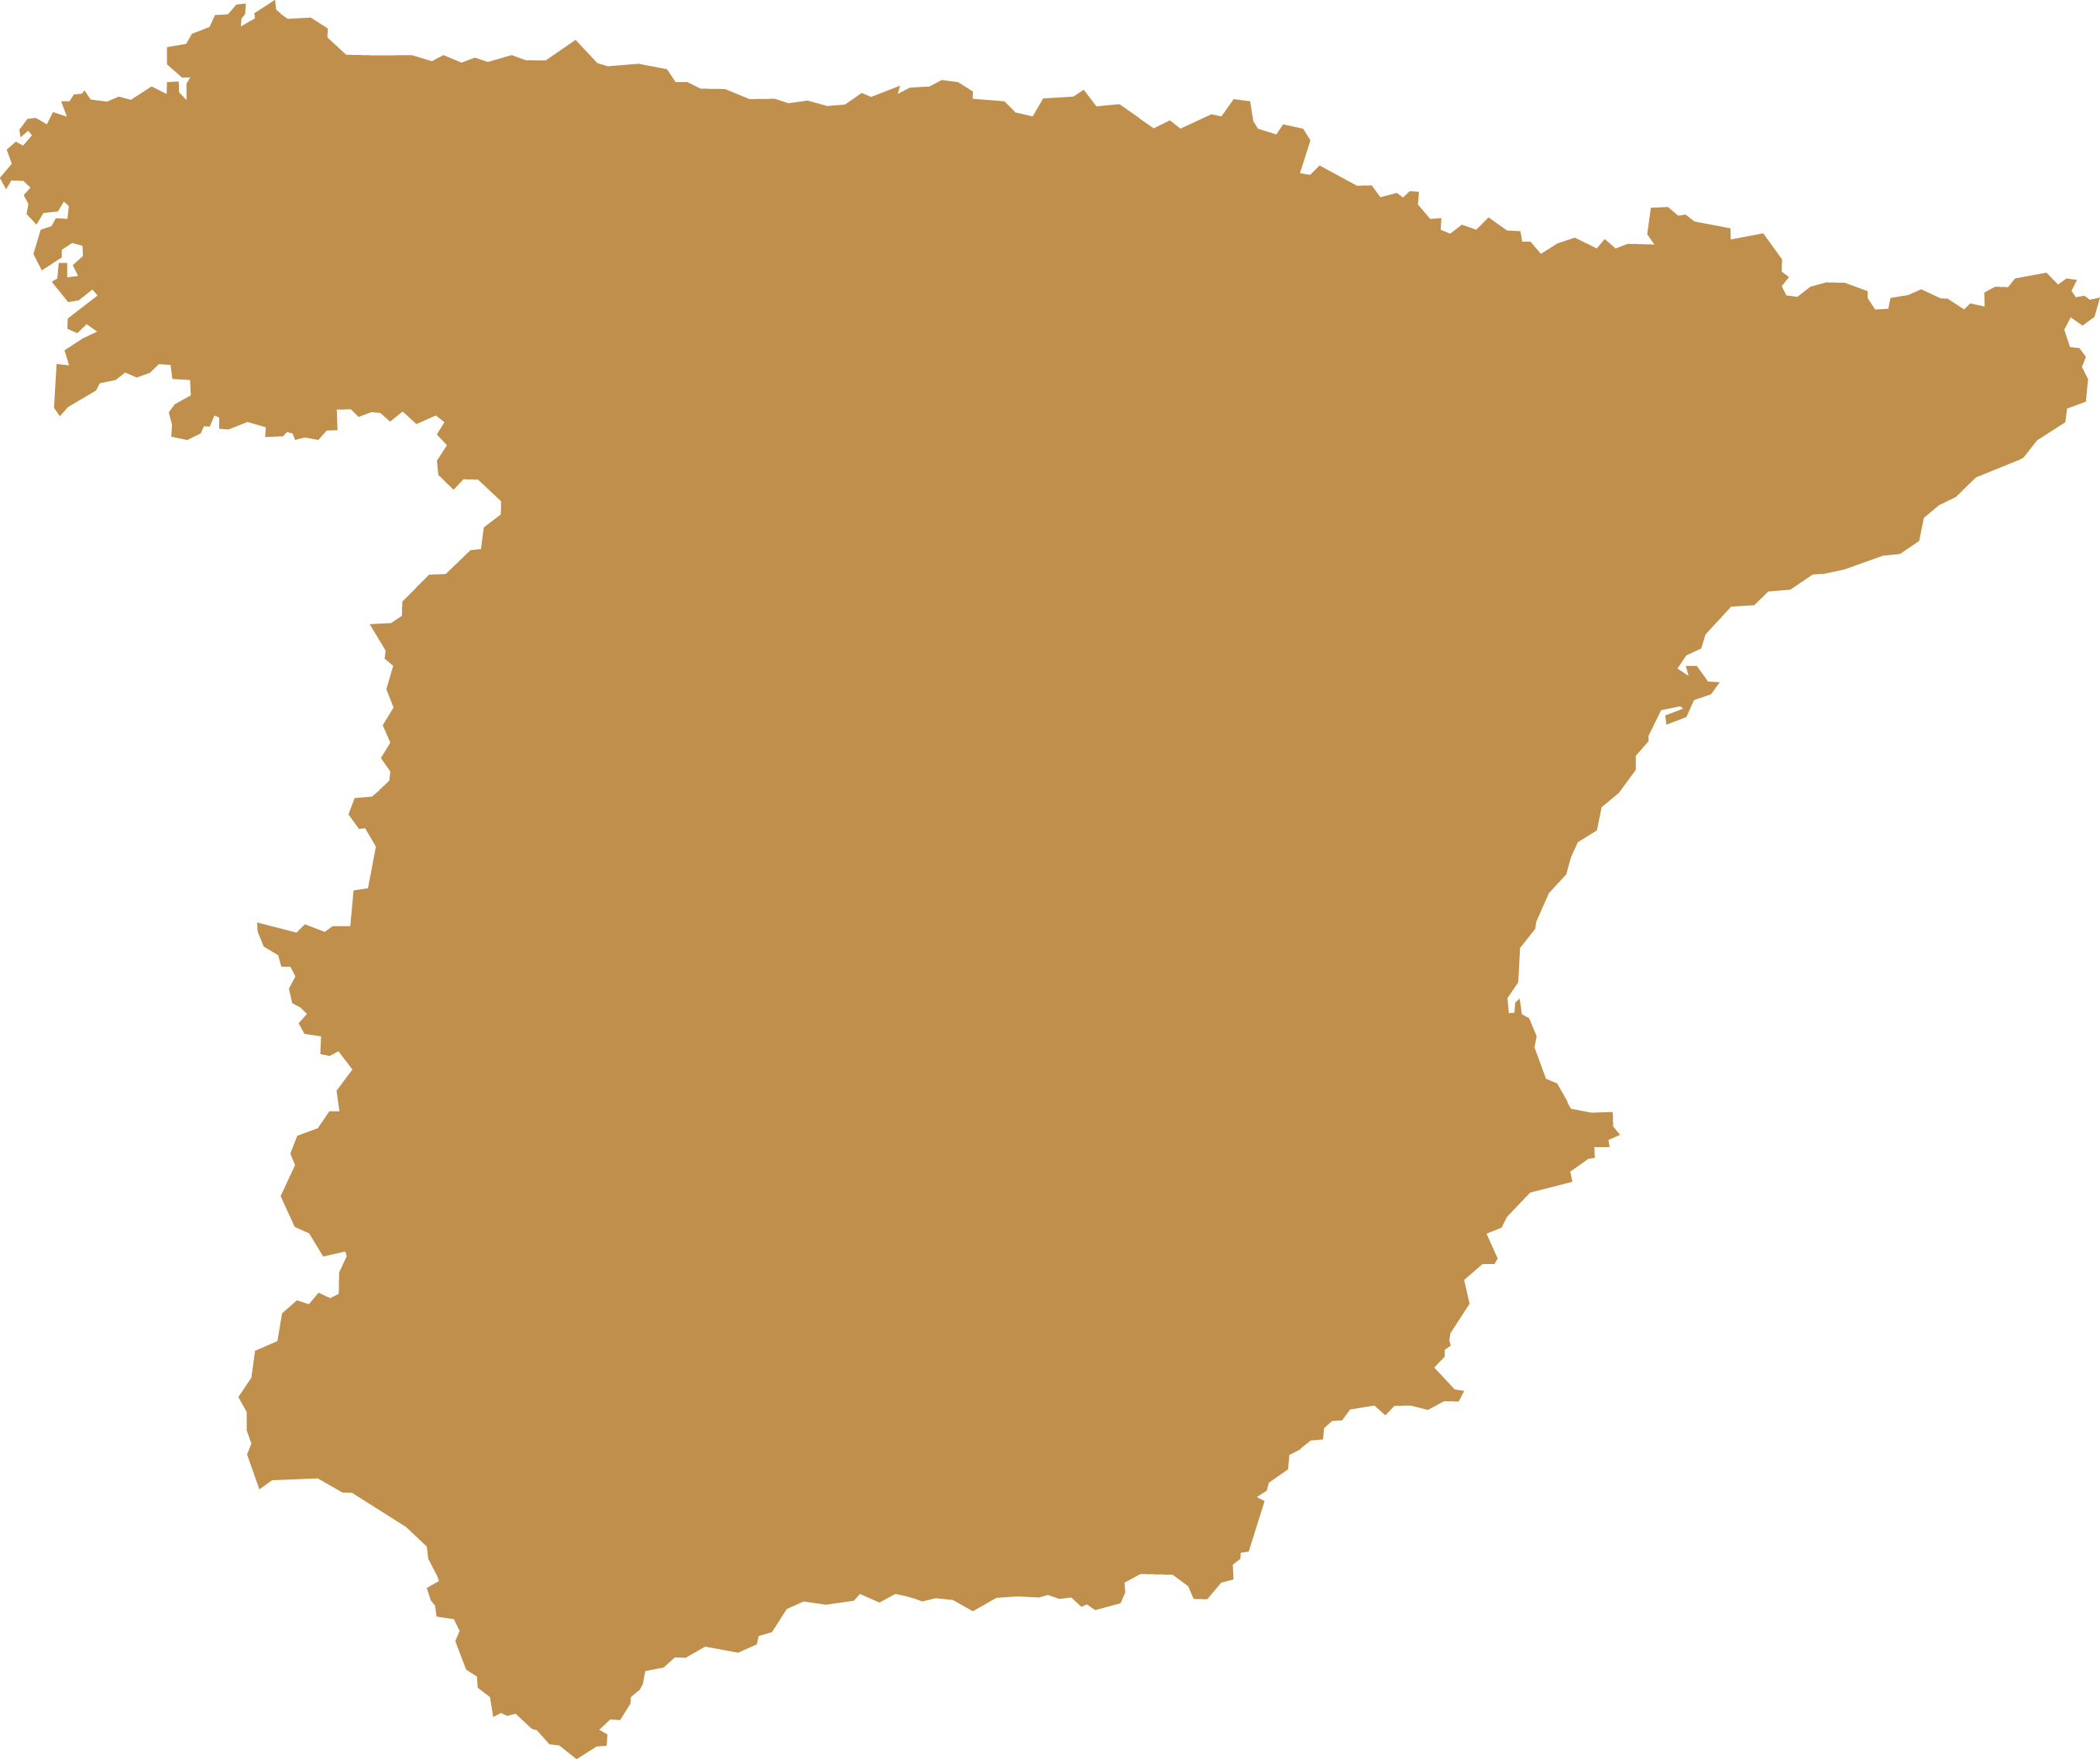 10 Blank Map Of Spain Free Cliparts That You Can Download To You    